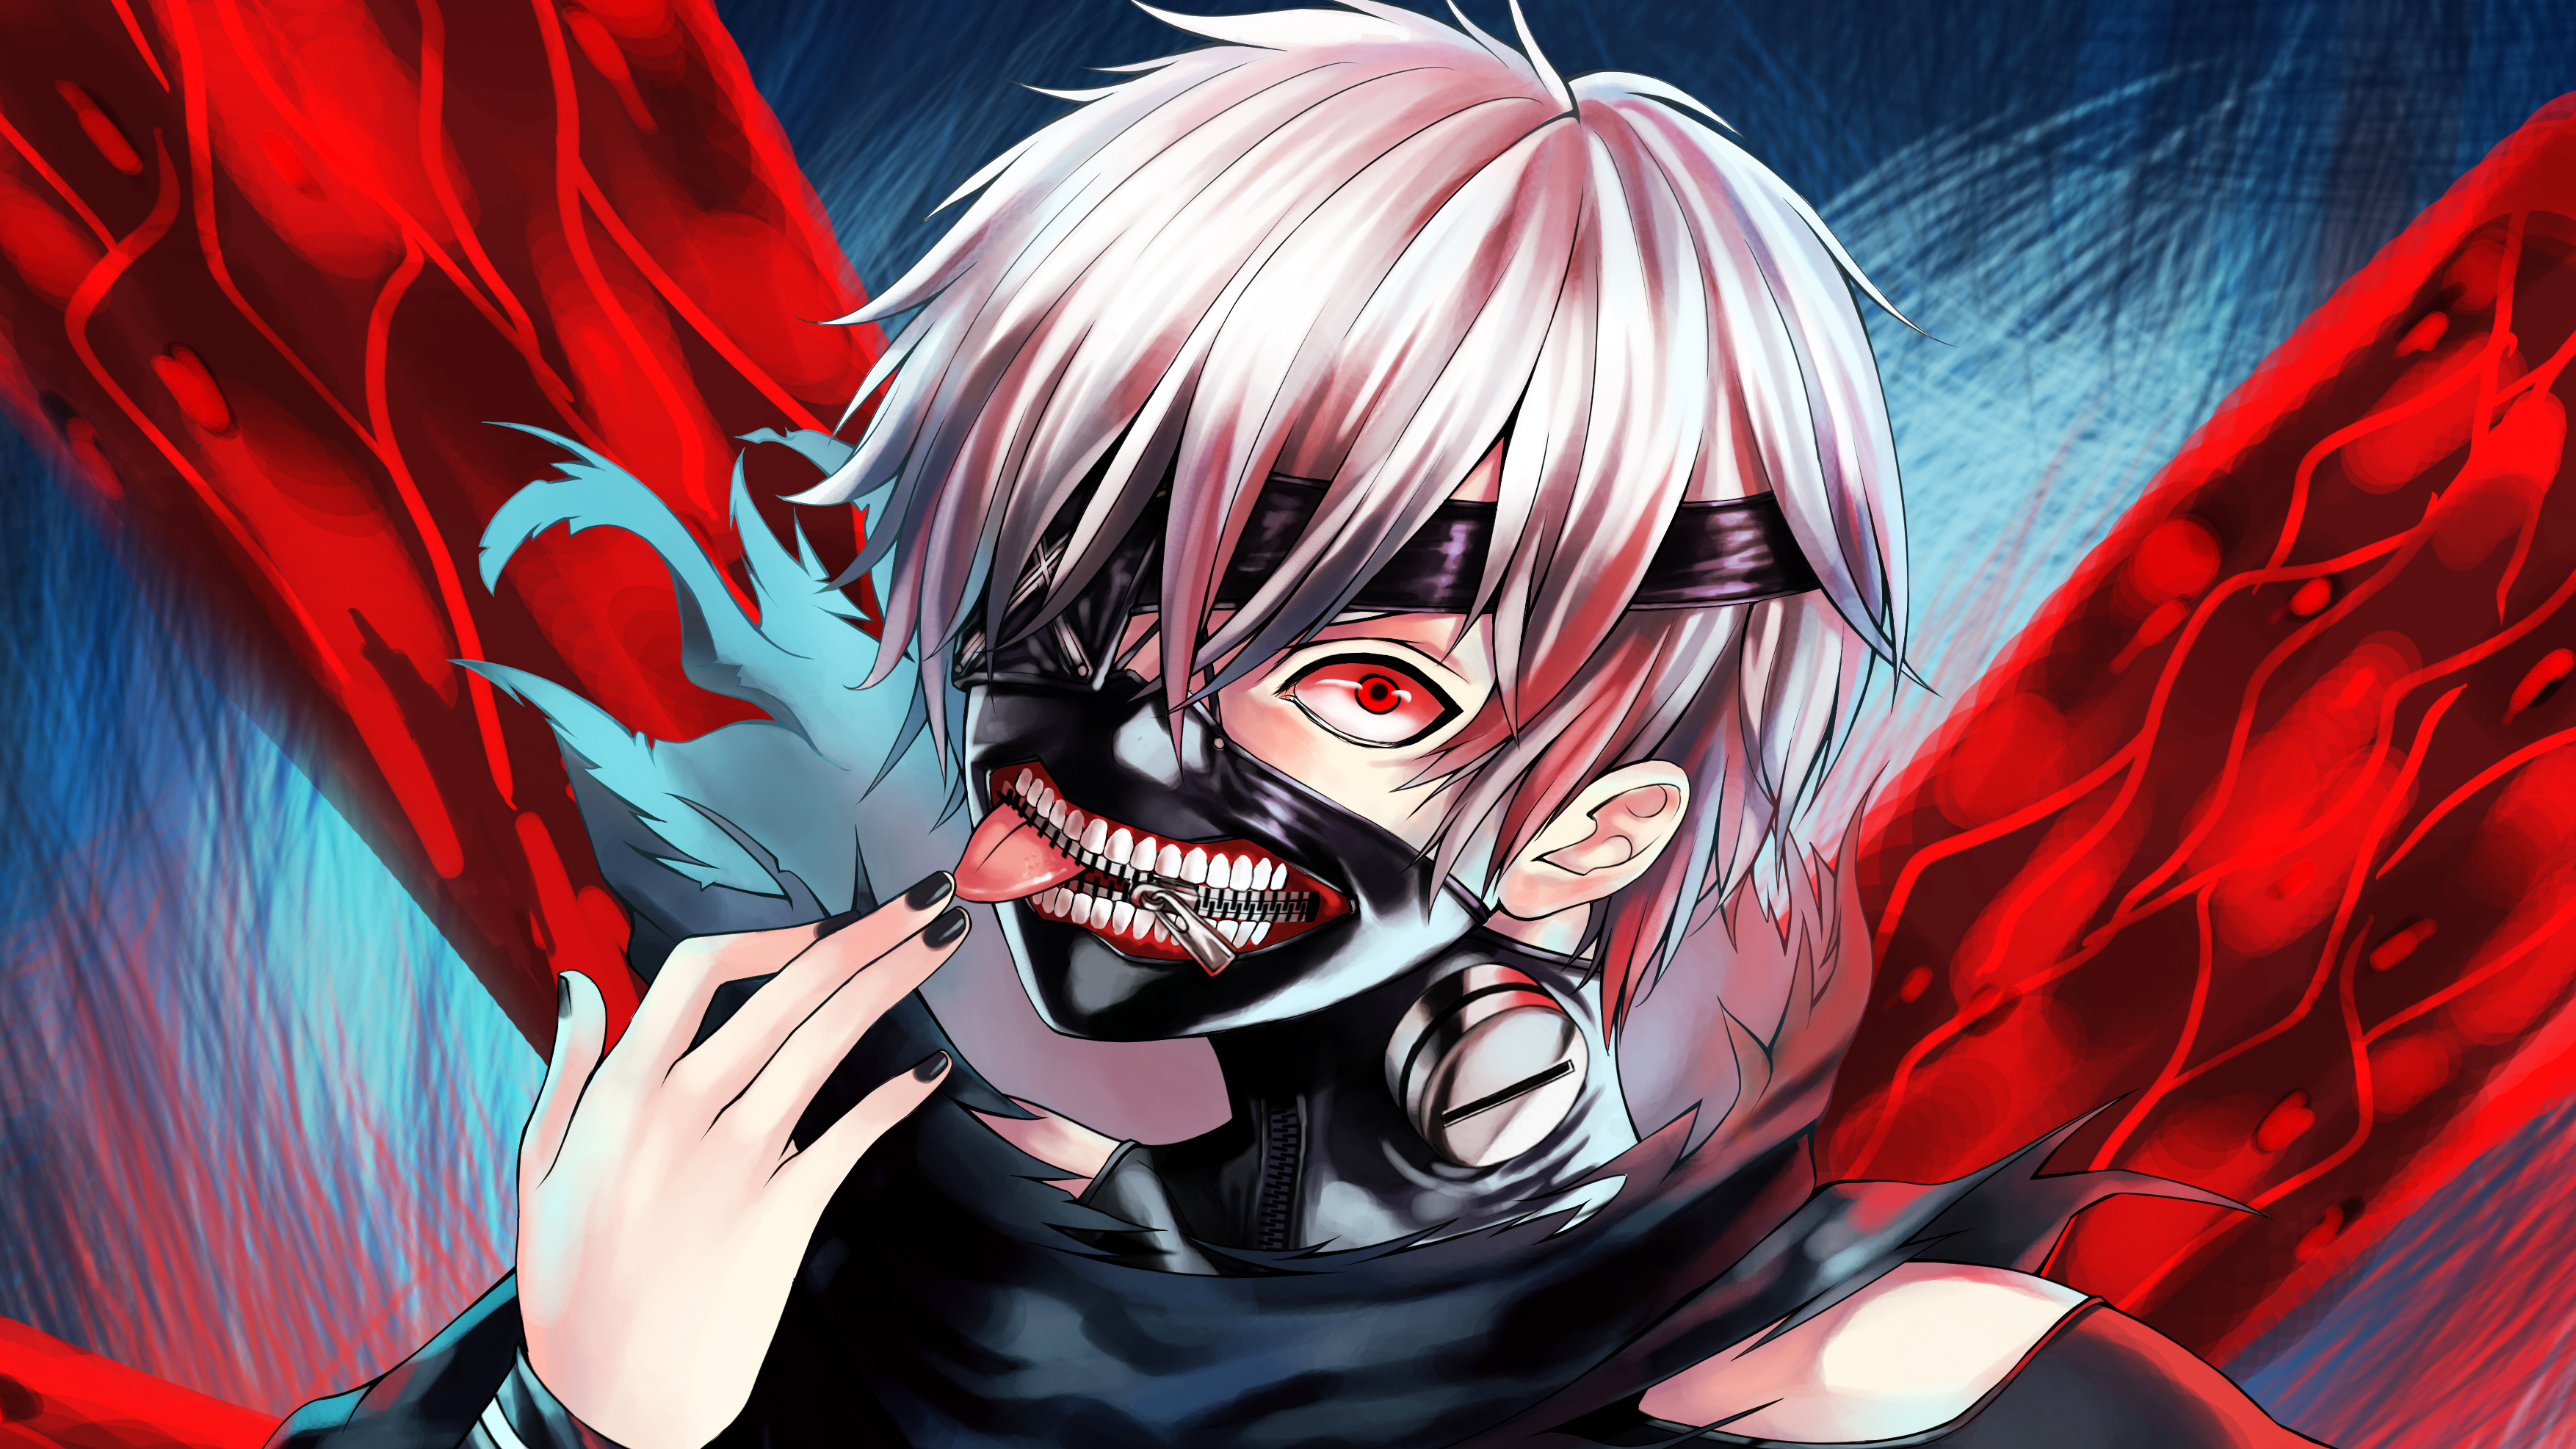 Tokyo Ghoul Anime 4k, HD Anime, 4k Wallpapers, Images, Backgrounds